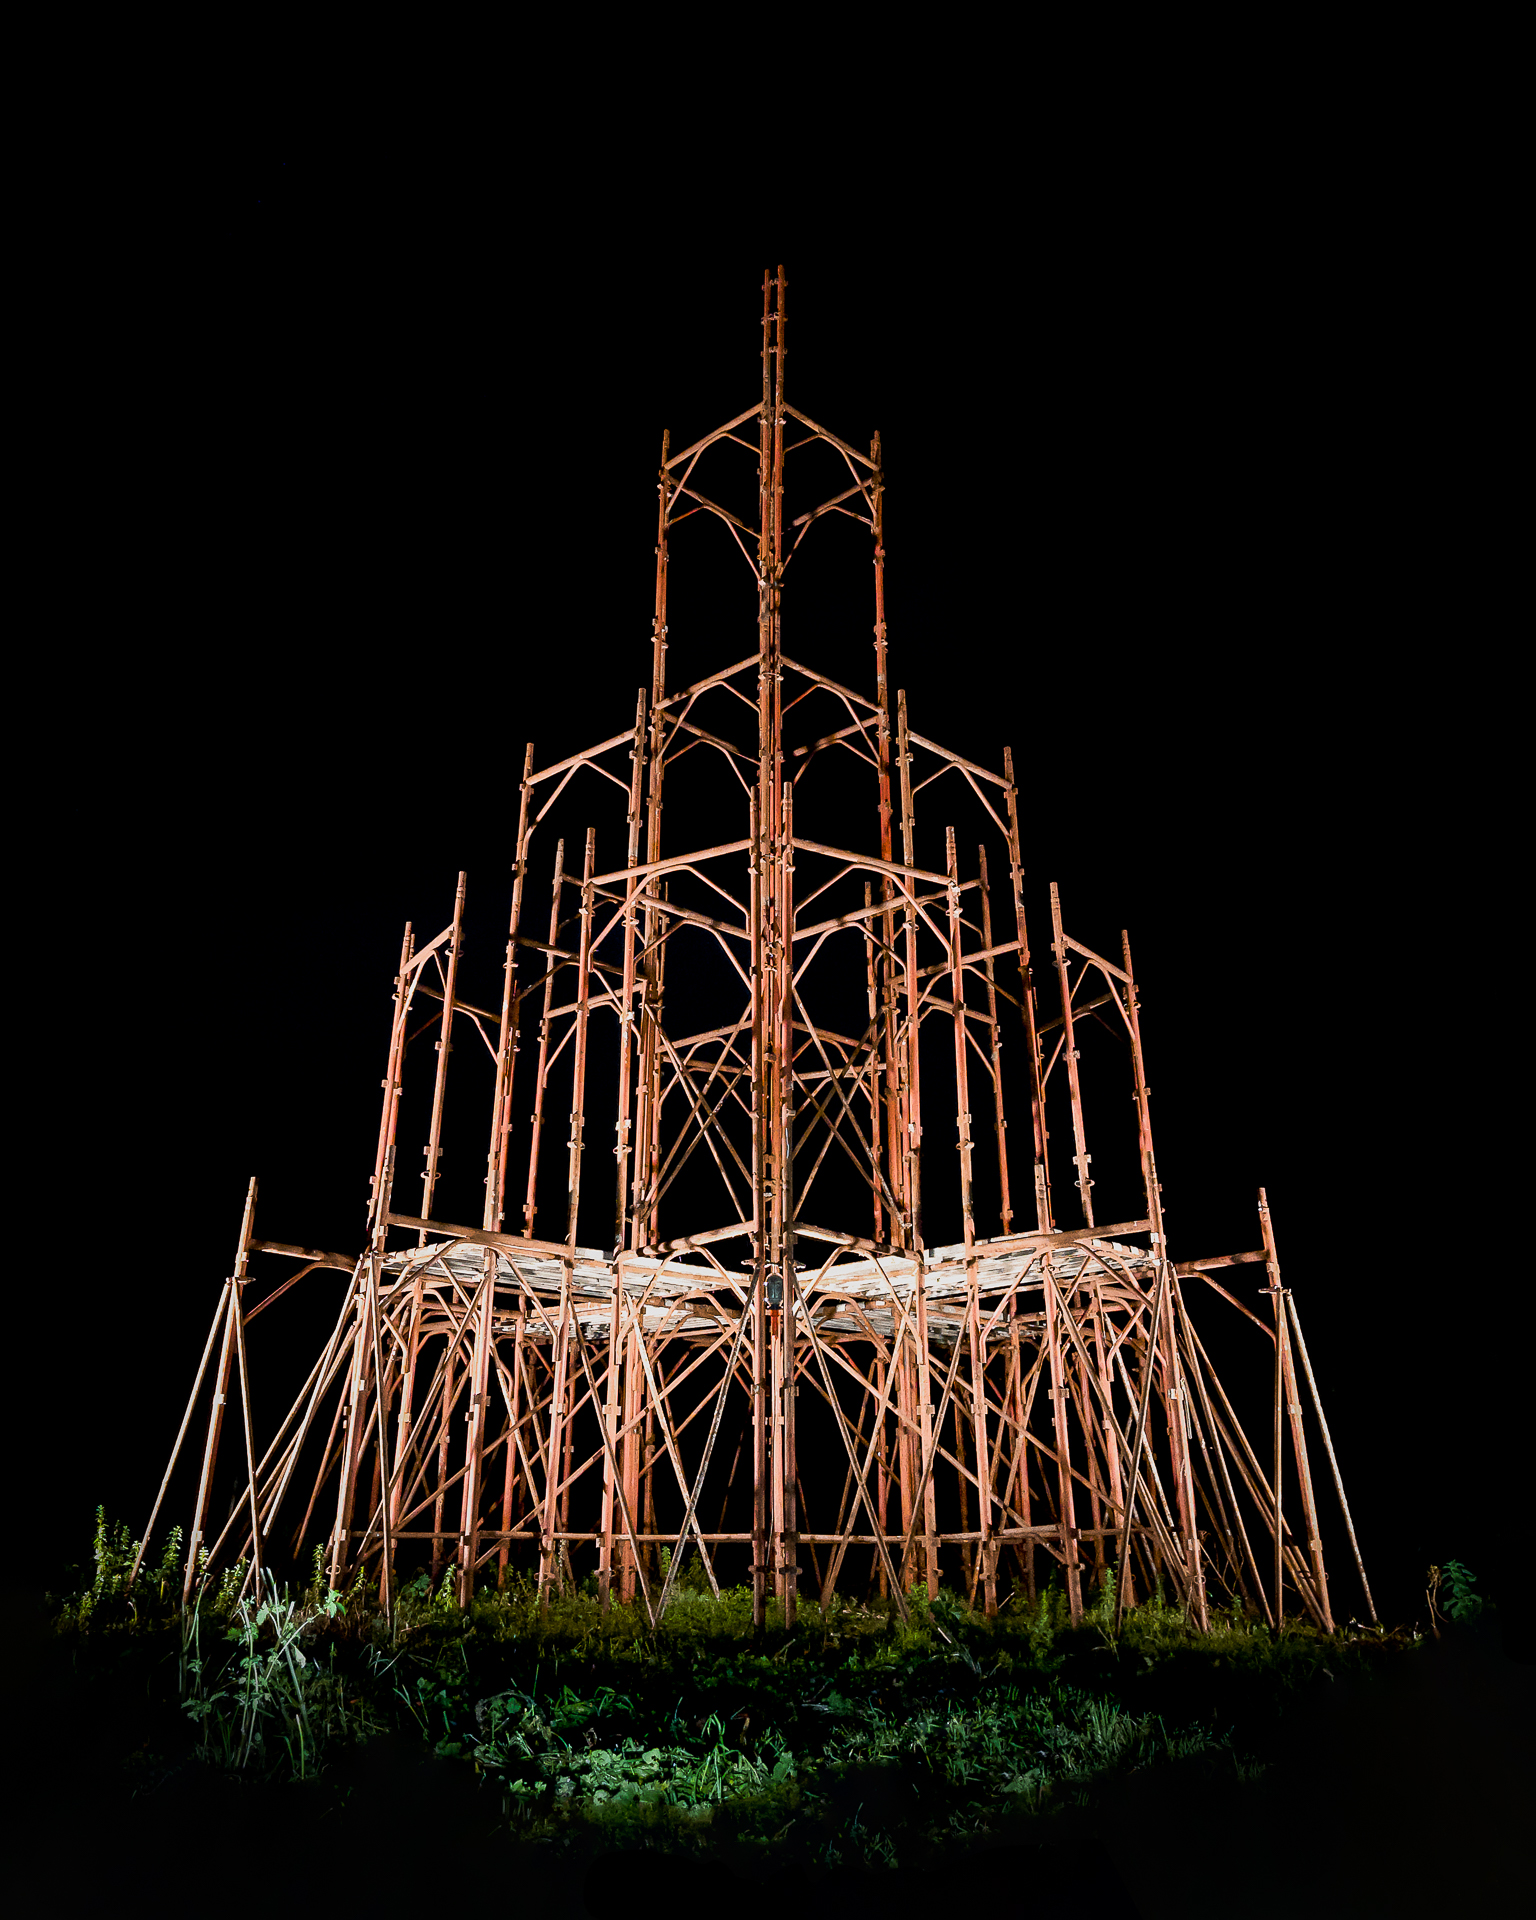 Documentation of a cathedral made from brown scaffolding, against a black background.